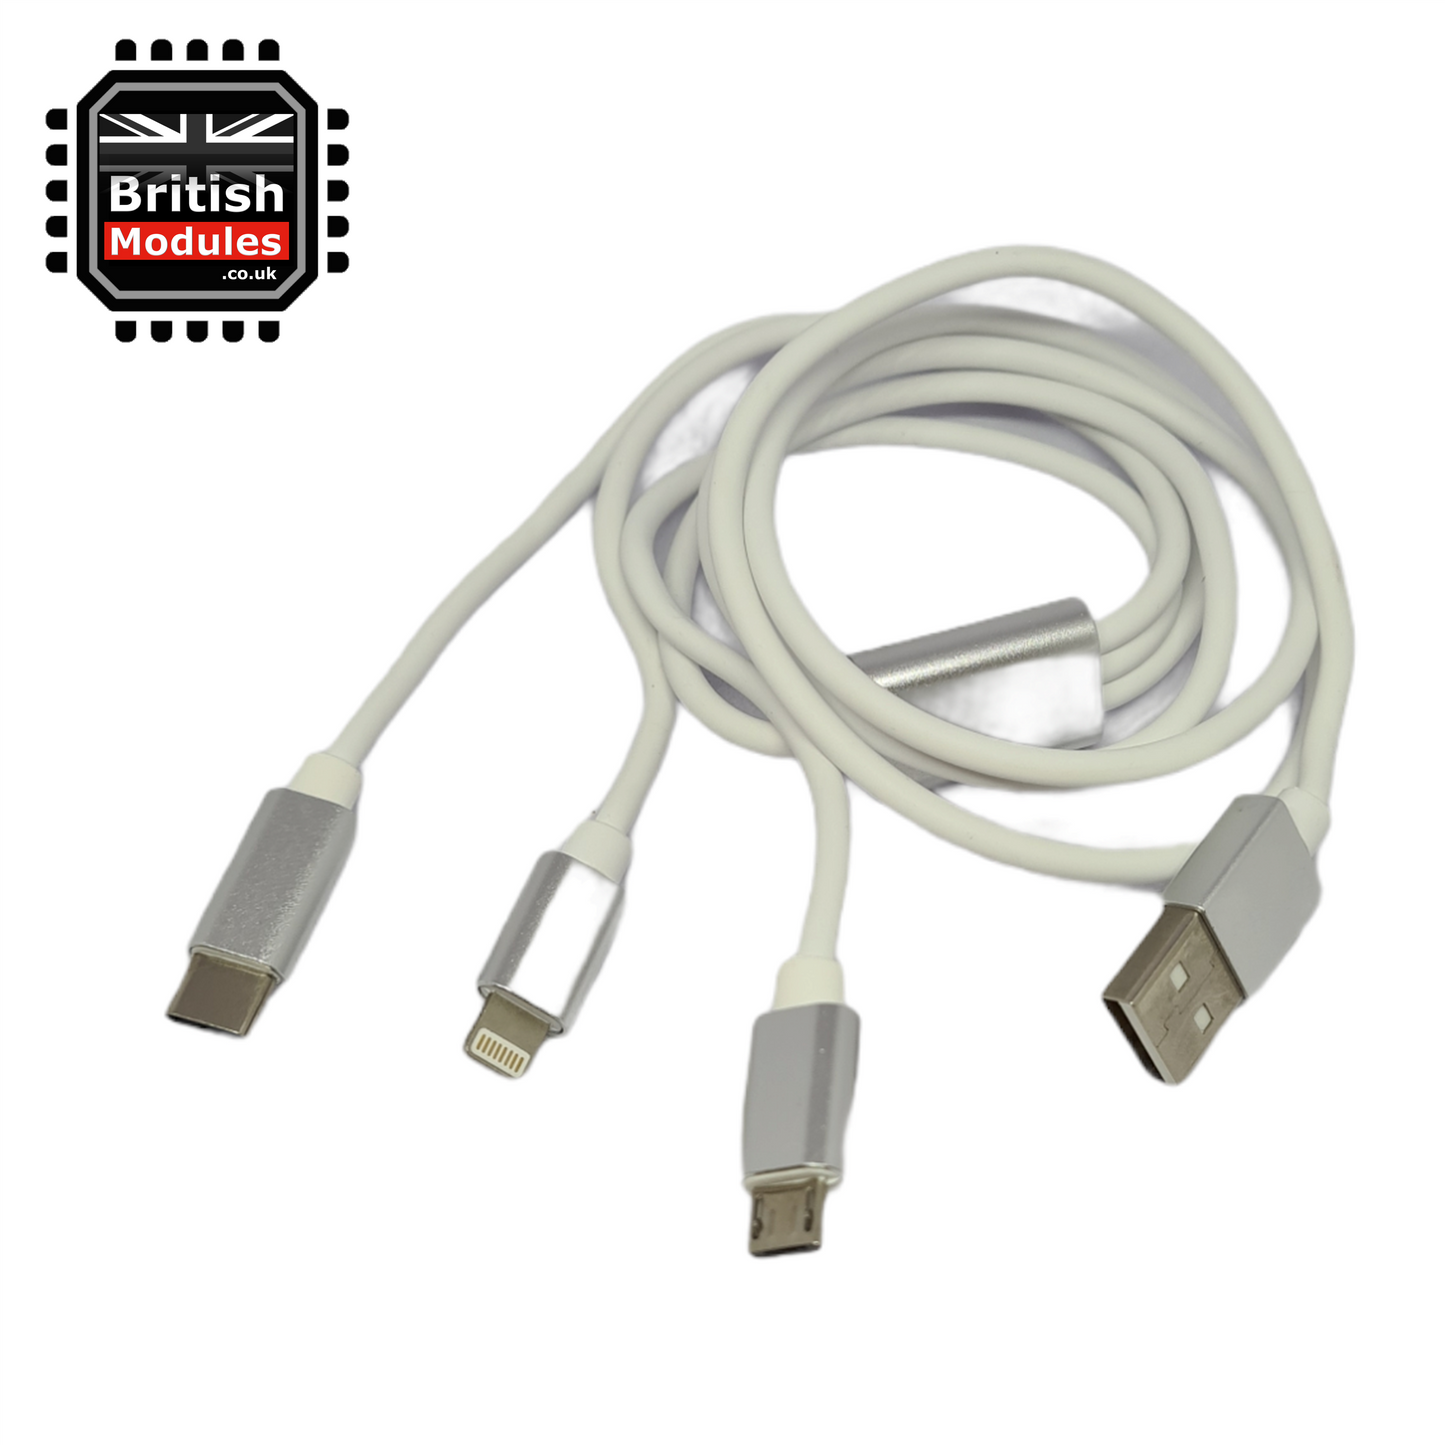 3 in 1 Multi Charging Cable Micro USB Type C Apple Lightning Multi Connector Universal iPhone Android Samsung Galaxy OnePlus Huawei Xiaomi Honor Sony